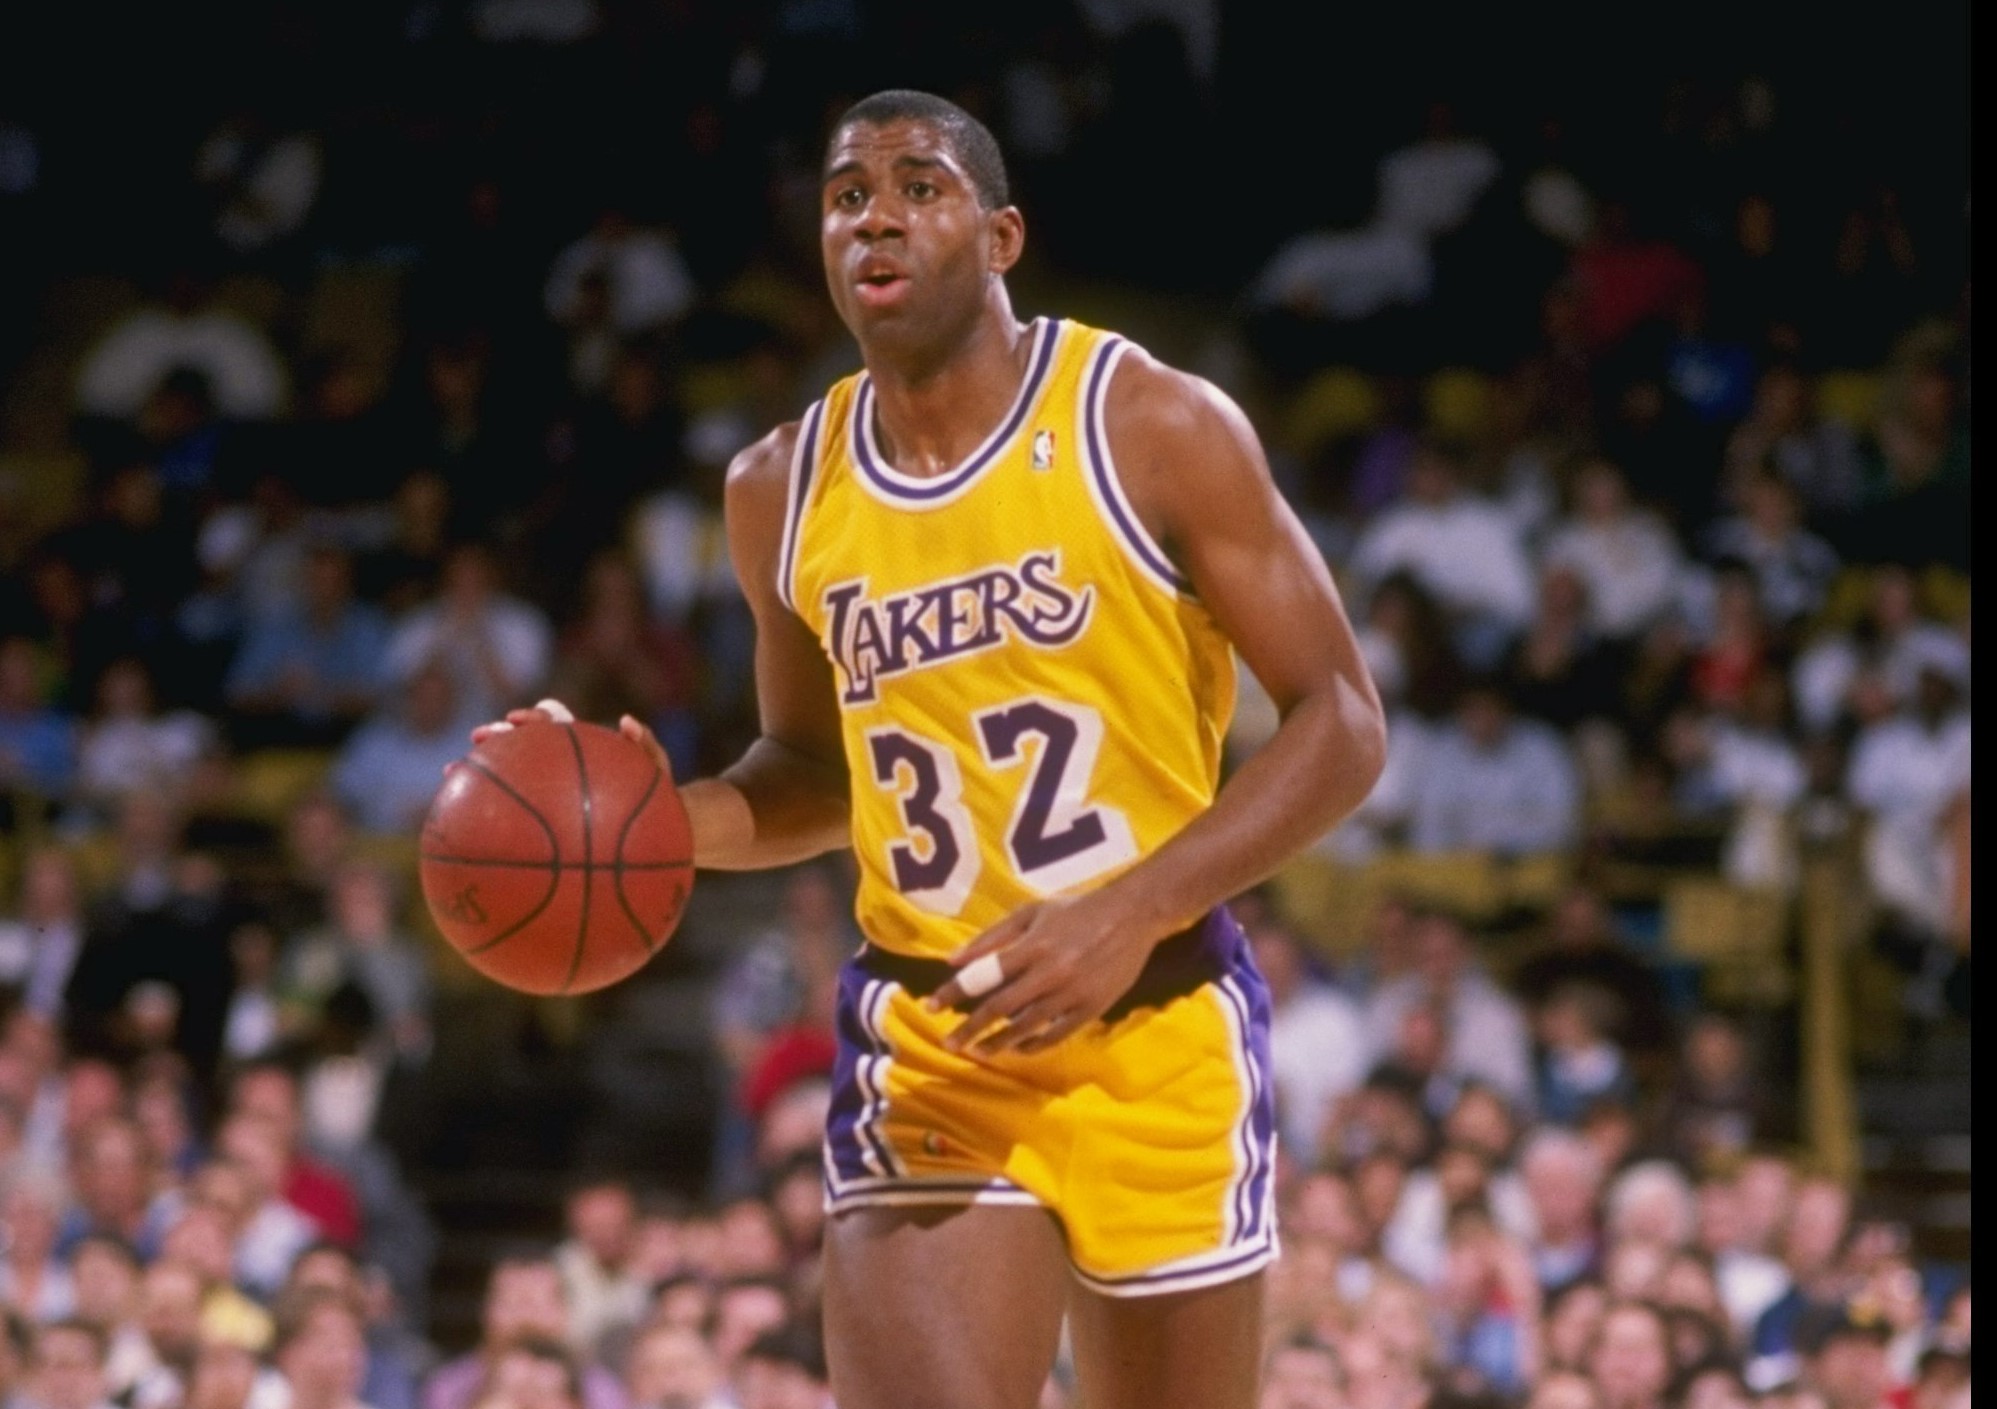 Guard Magic Johnson of the Los Angeles Lakers in action.